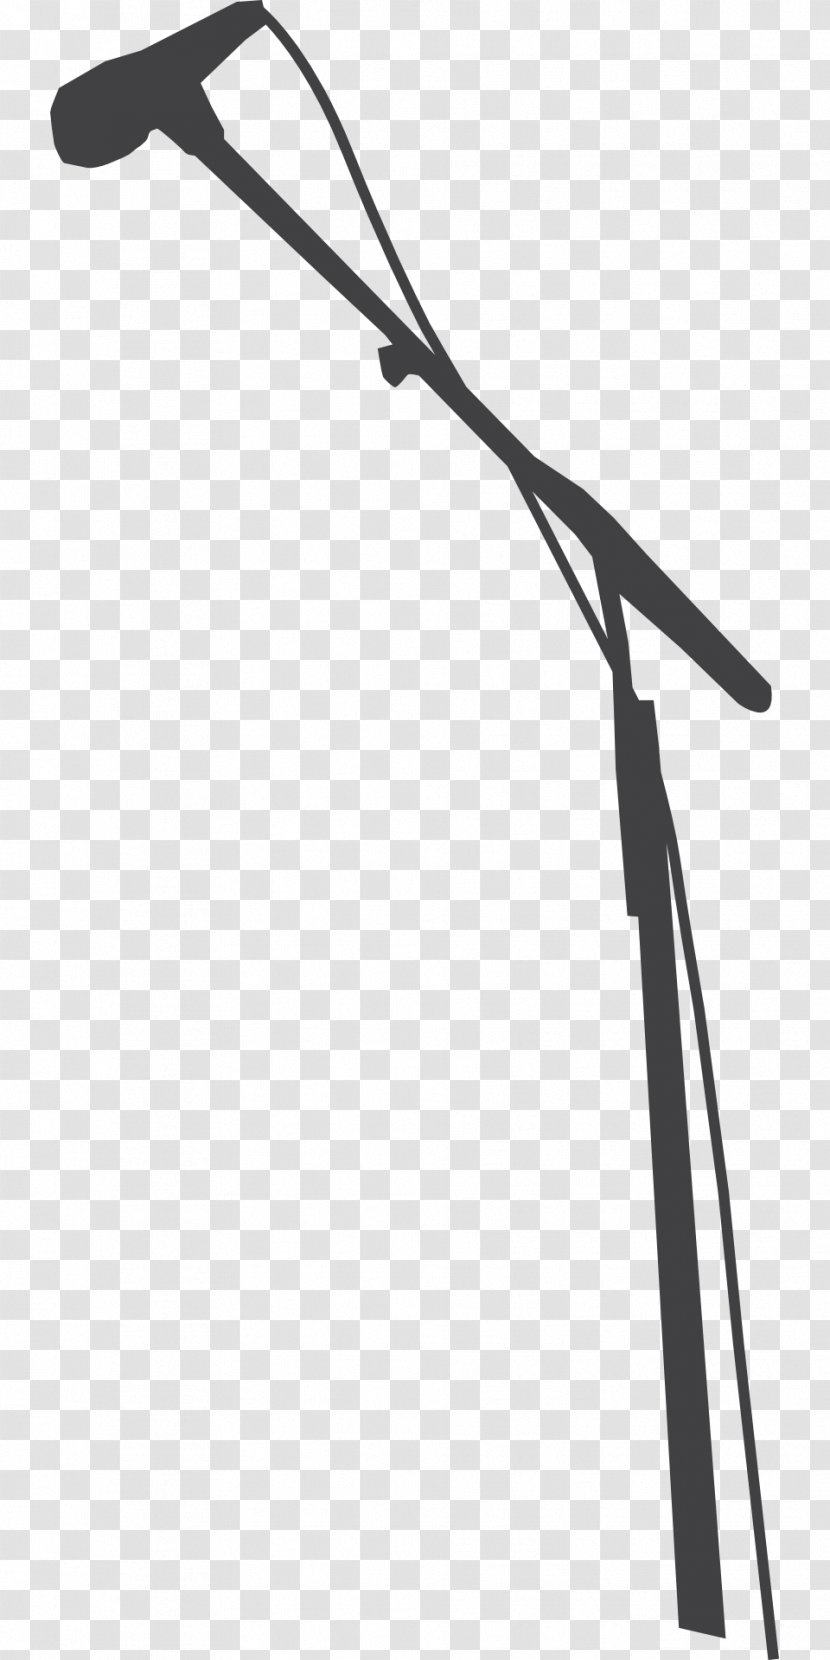 Microphone Stands Silhouette Drawing - Heart - Mike Transparent PNG